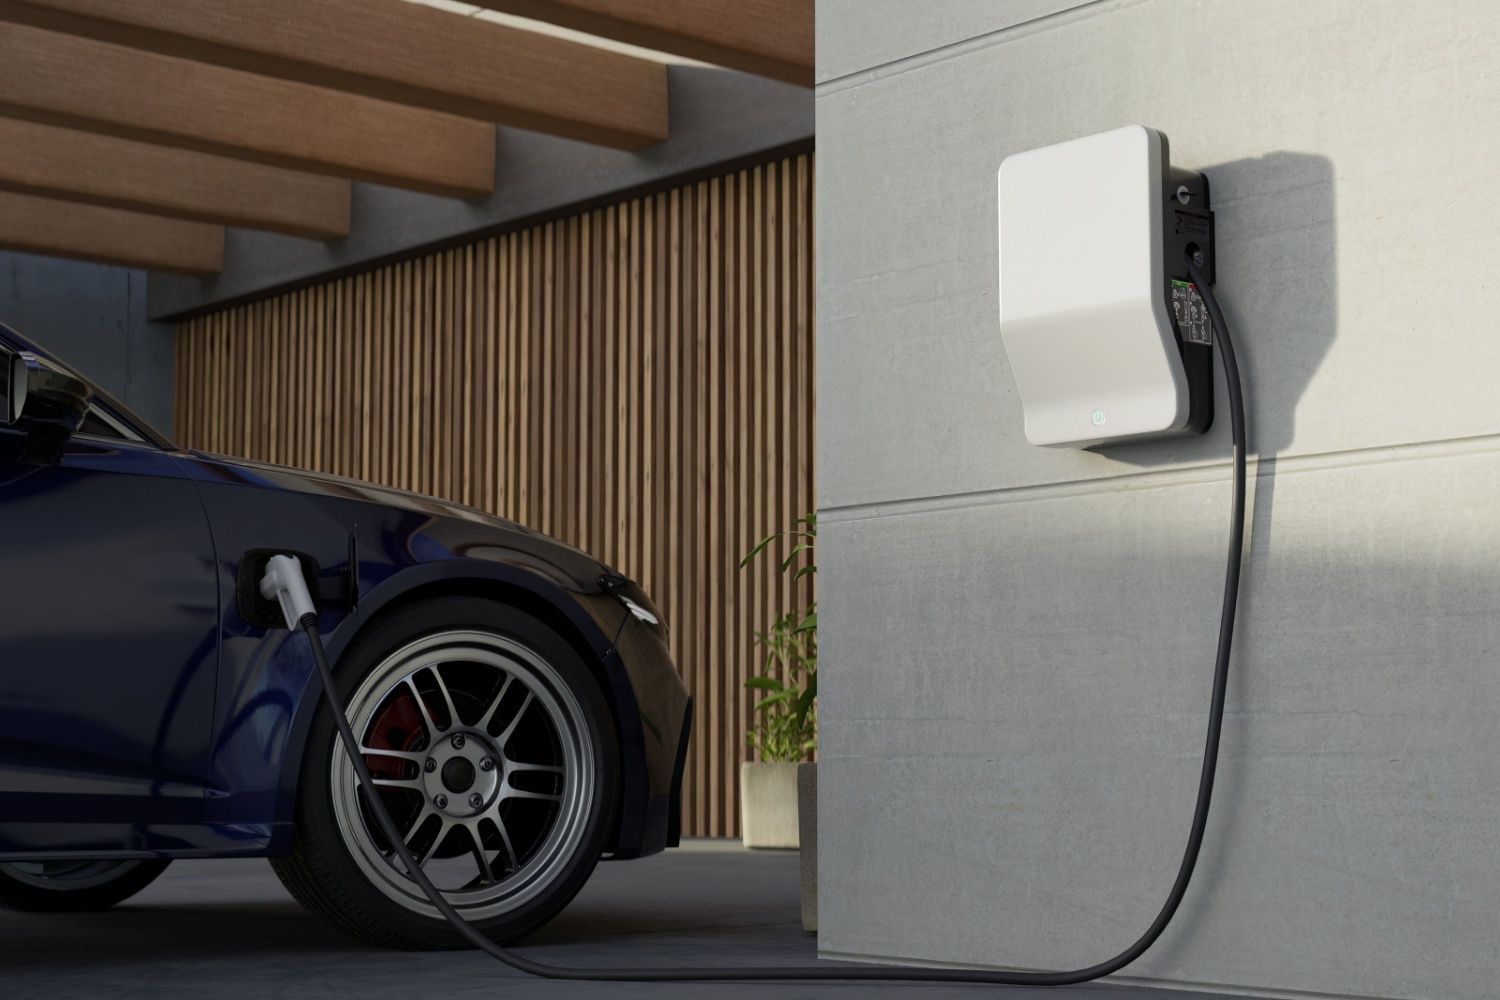 Solar-powered EV charger.